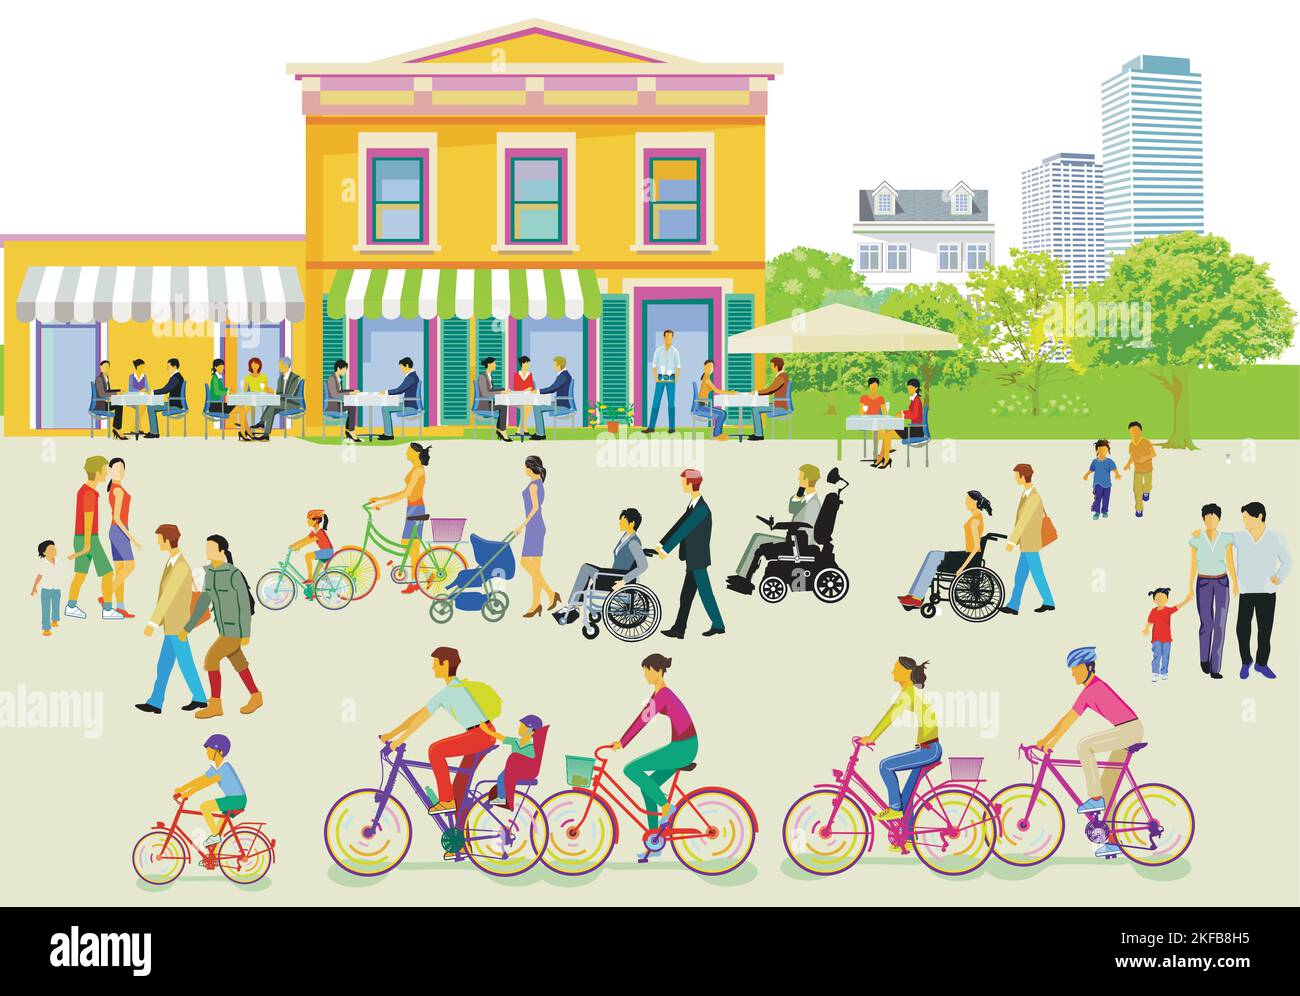 Pedestrians and disabled people in the city park, illustration Stock Vector